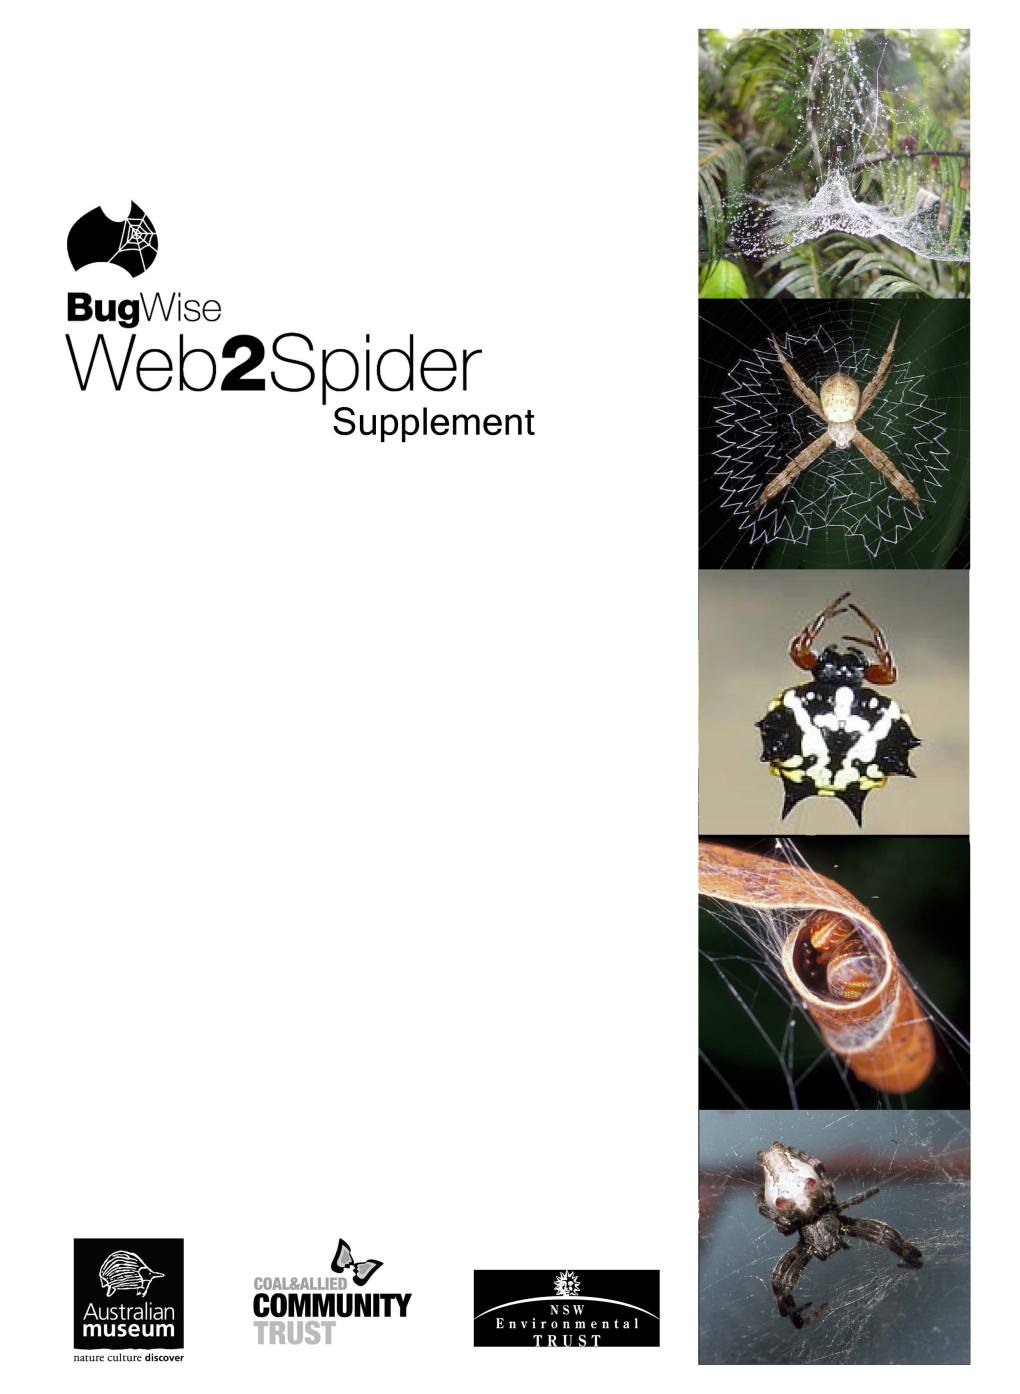 Spiders Around the Sydney and Hunter Region That Commonly Make the Web Types Found in the Web2spider Guide